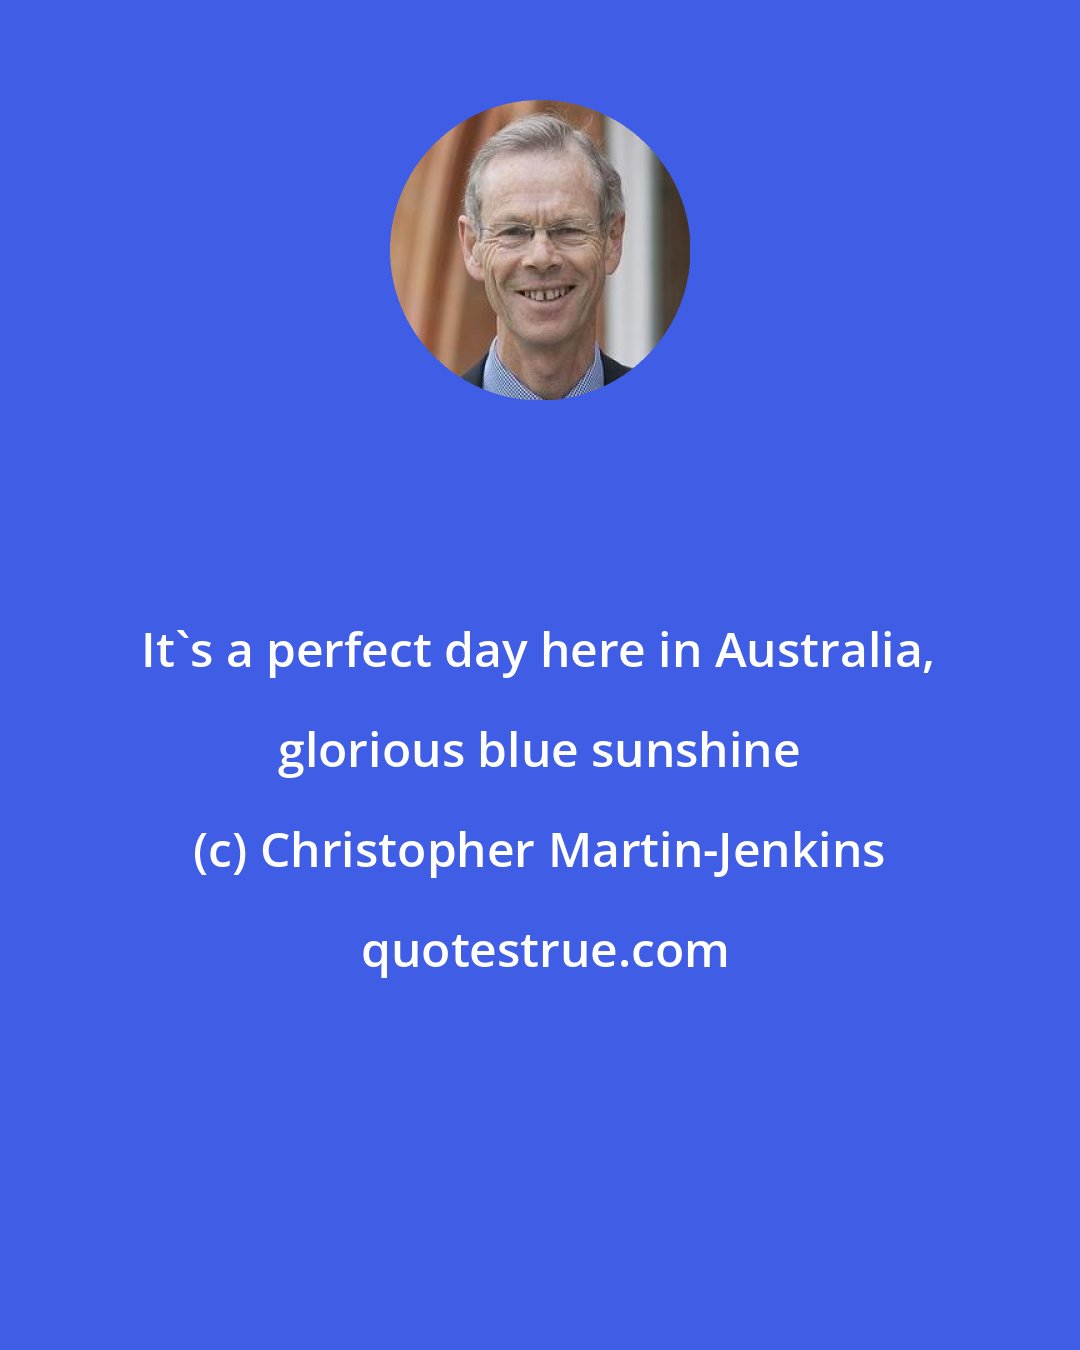 Christopher Martin-Jenkins: It's a perfect day here in Australia, glorious blue sunshine